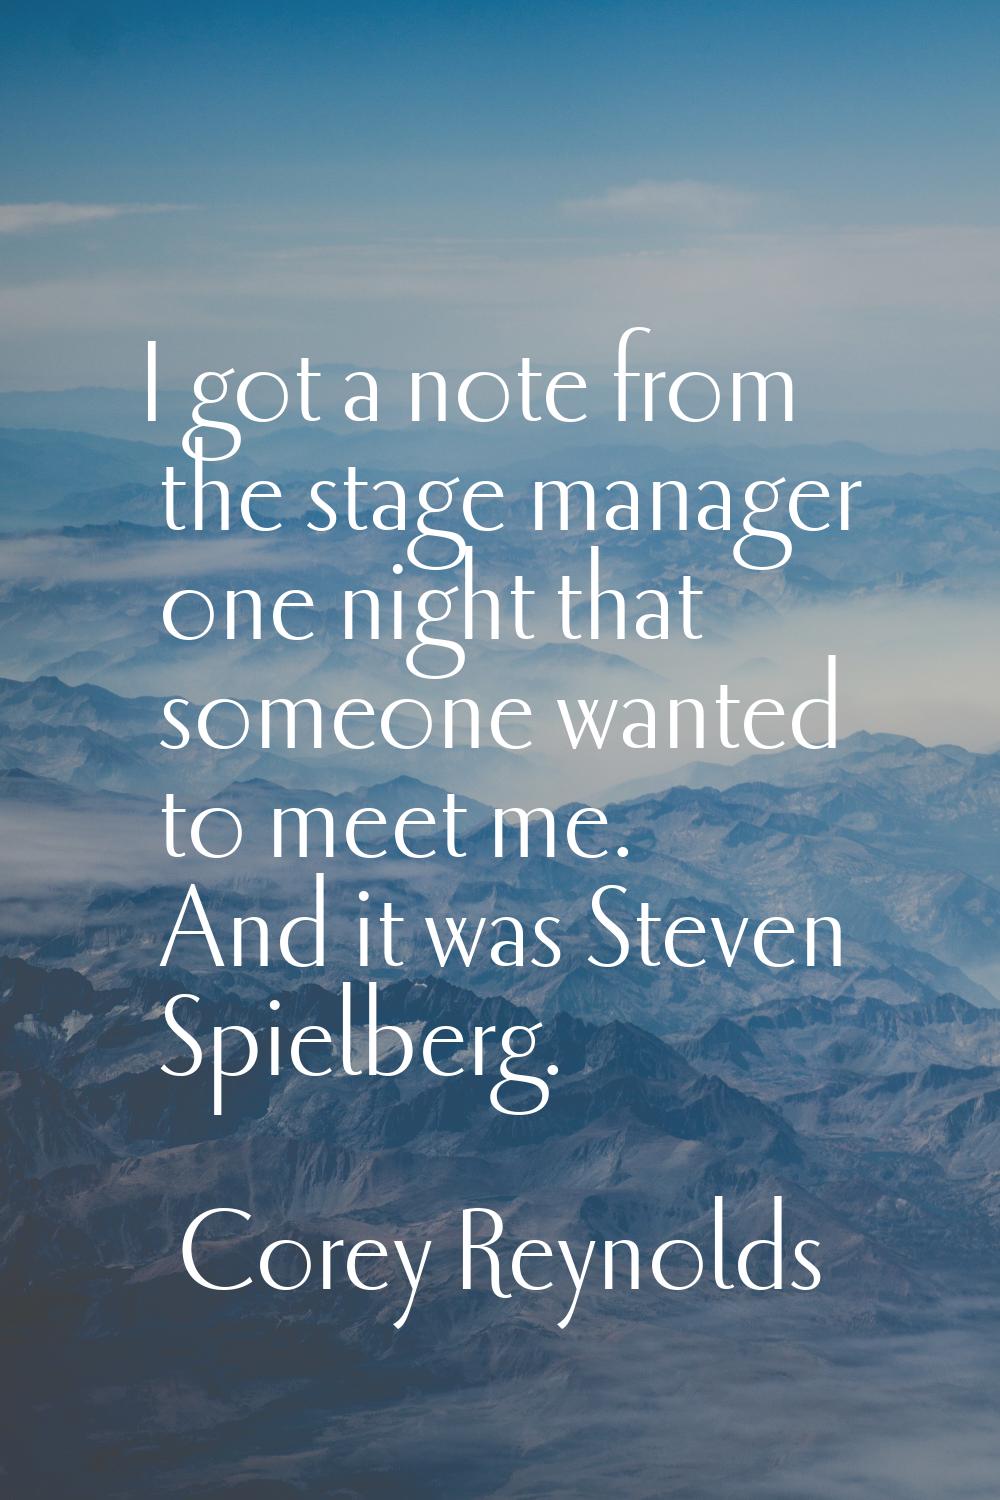 I got a note from the stage manager one night that someone wanted to meet me. And it was Steven Spi